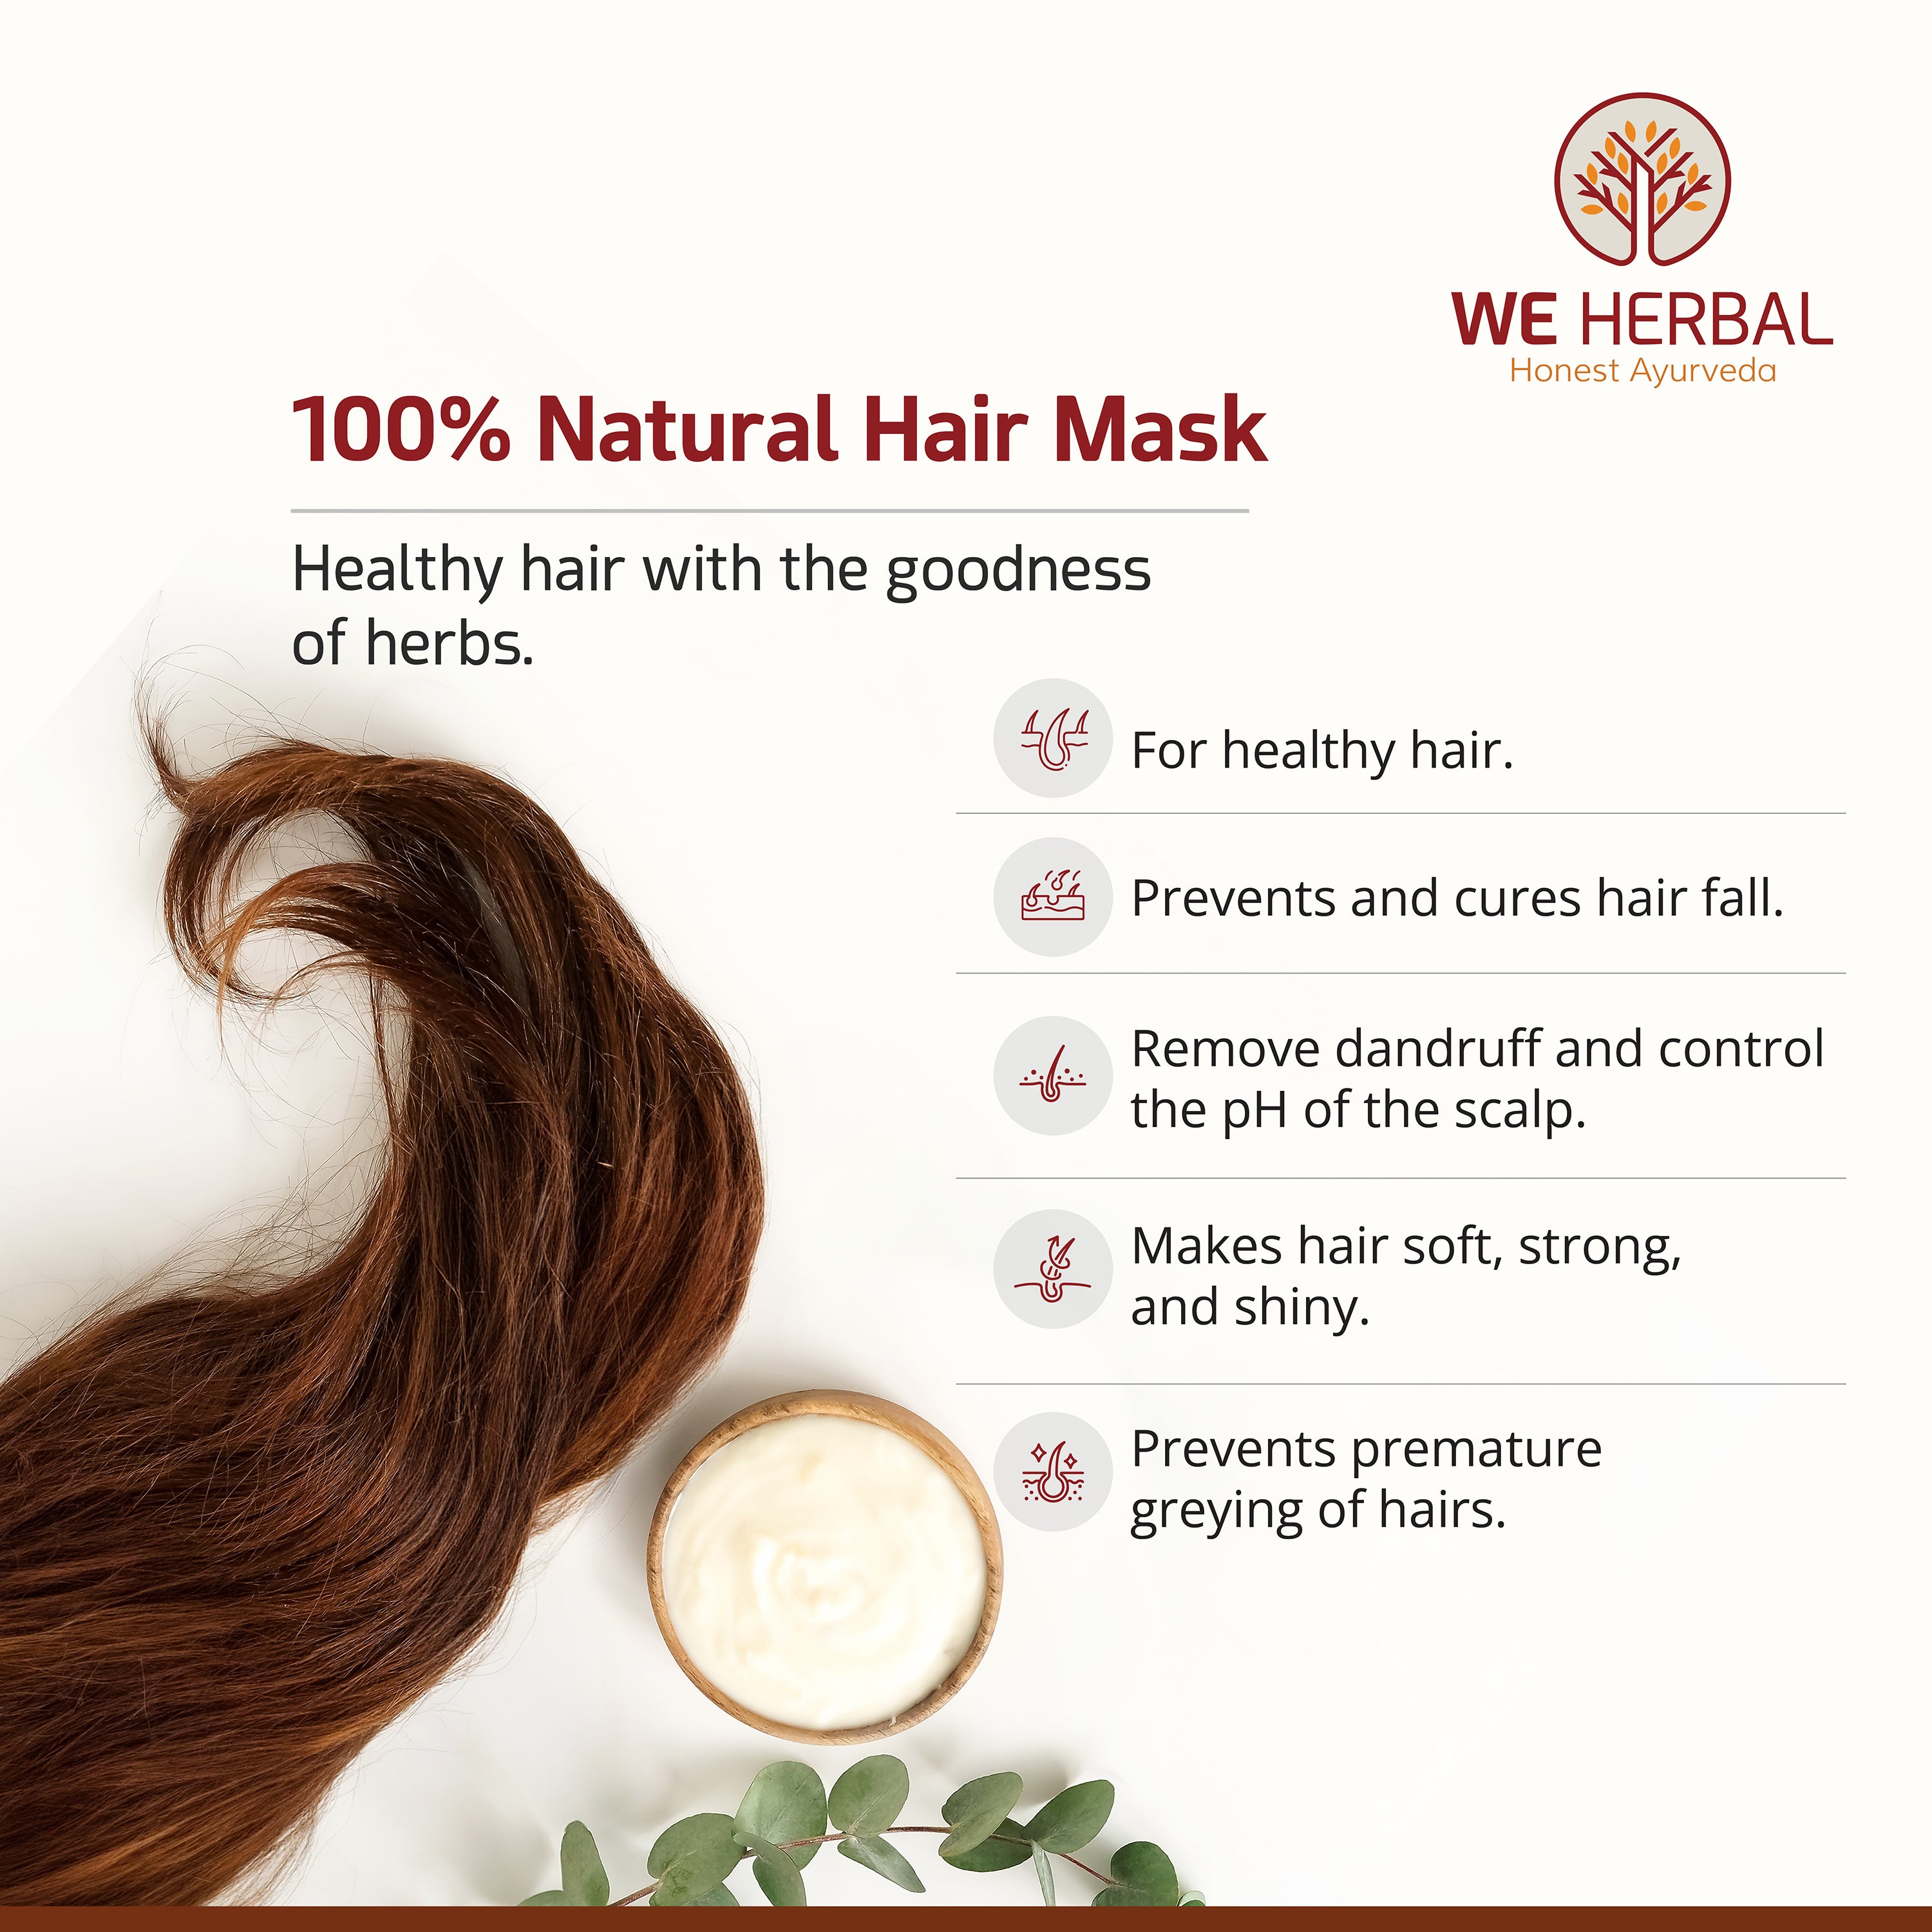 Herbal Hair Mask We Herbal | Back to the Nature